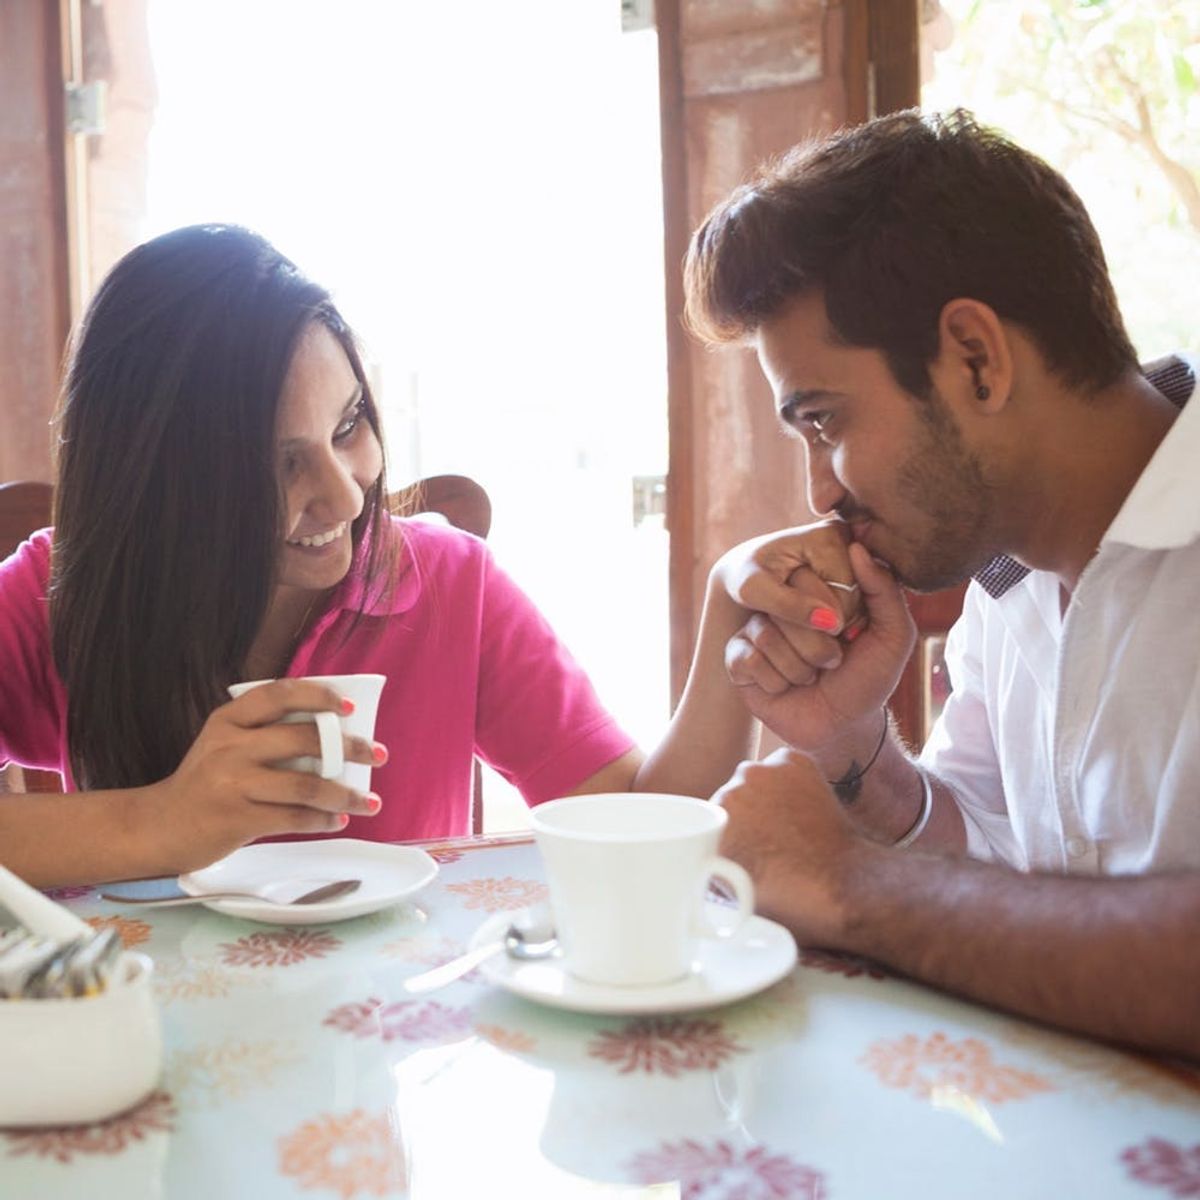 5 Expert Tips for When You Should Have a “Define the Relationship” Talk